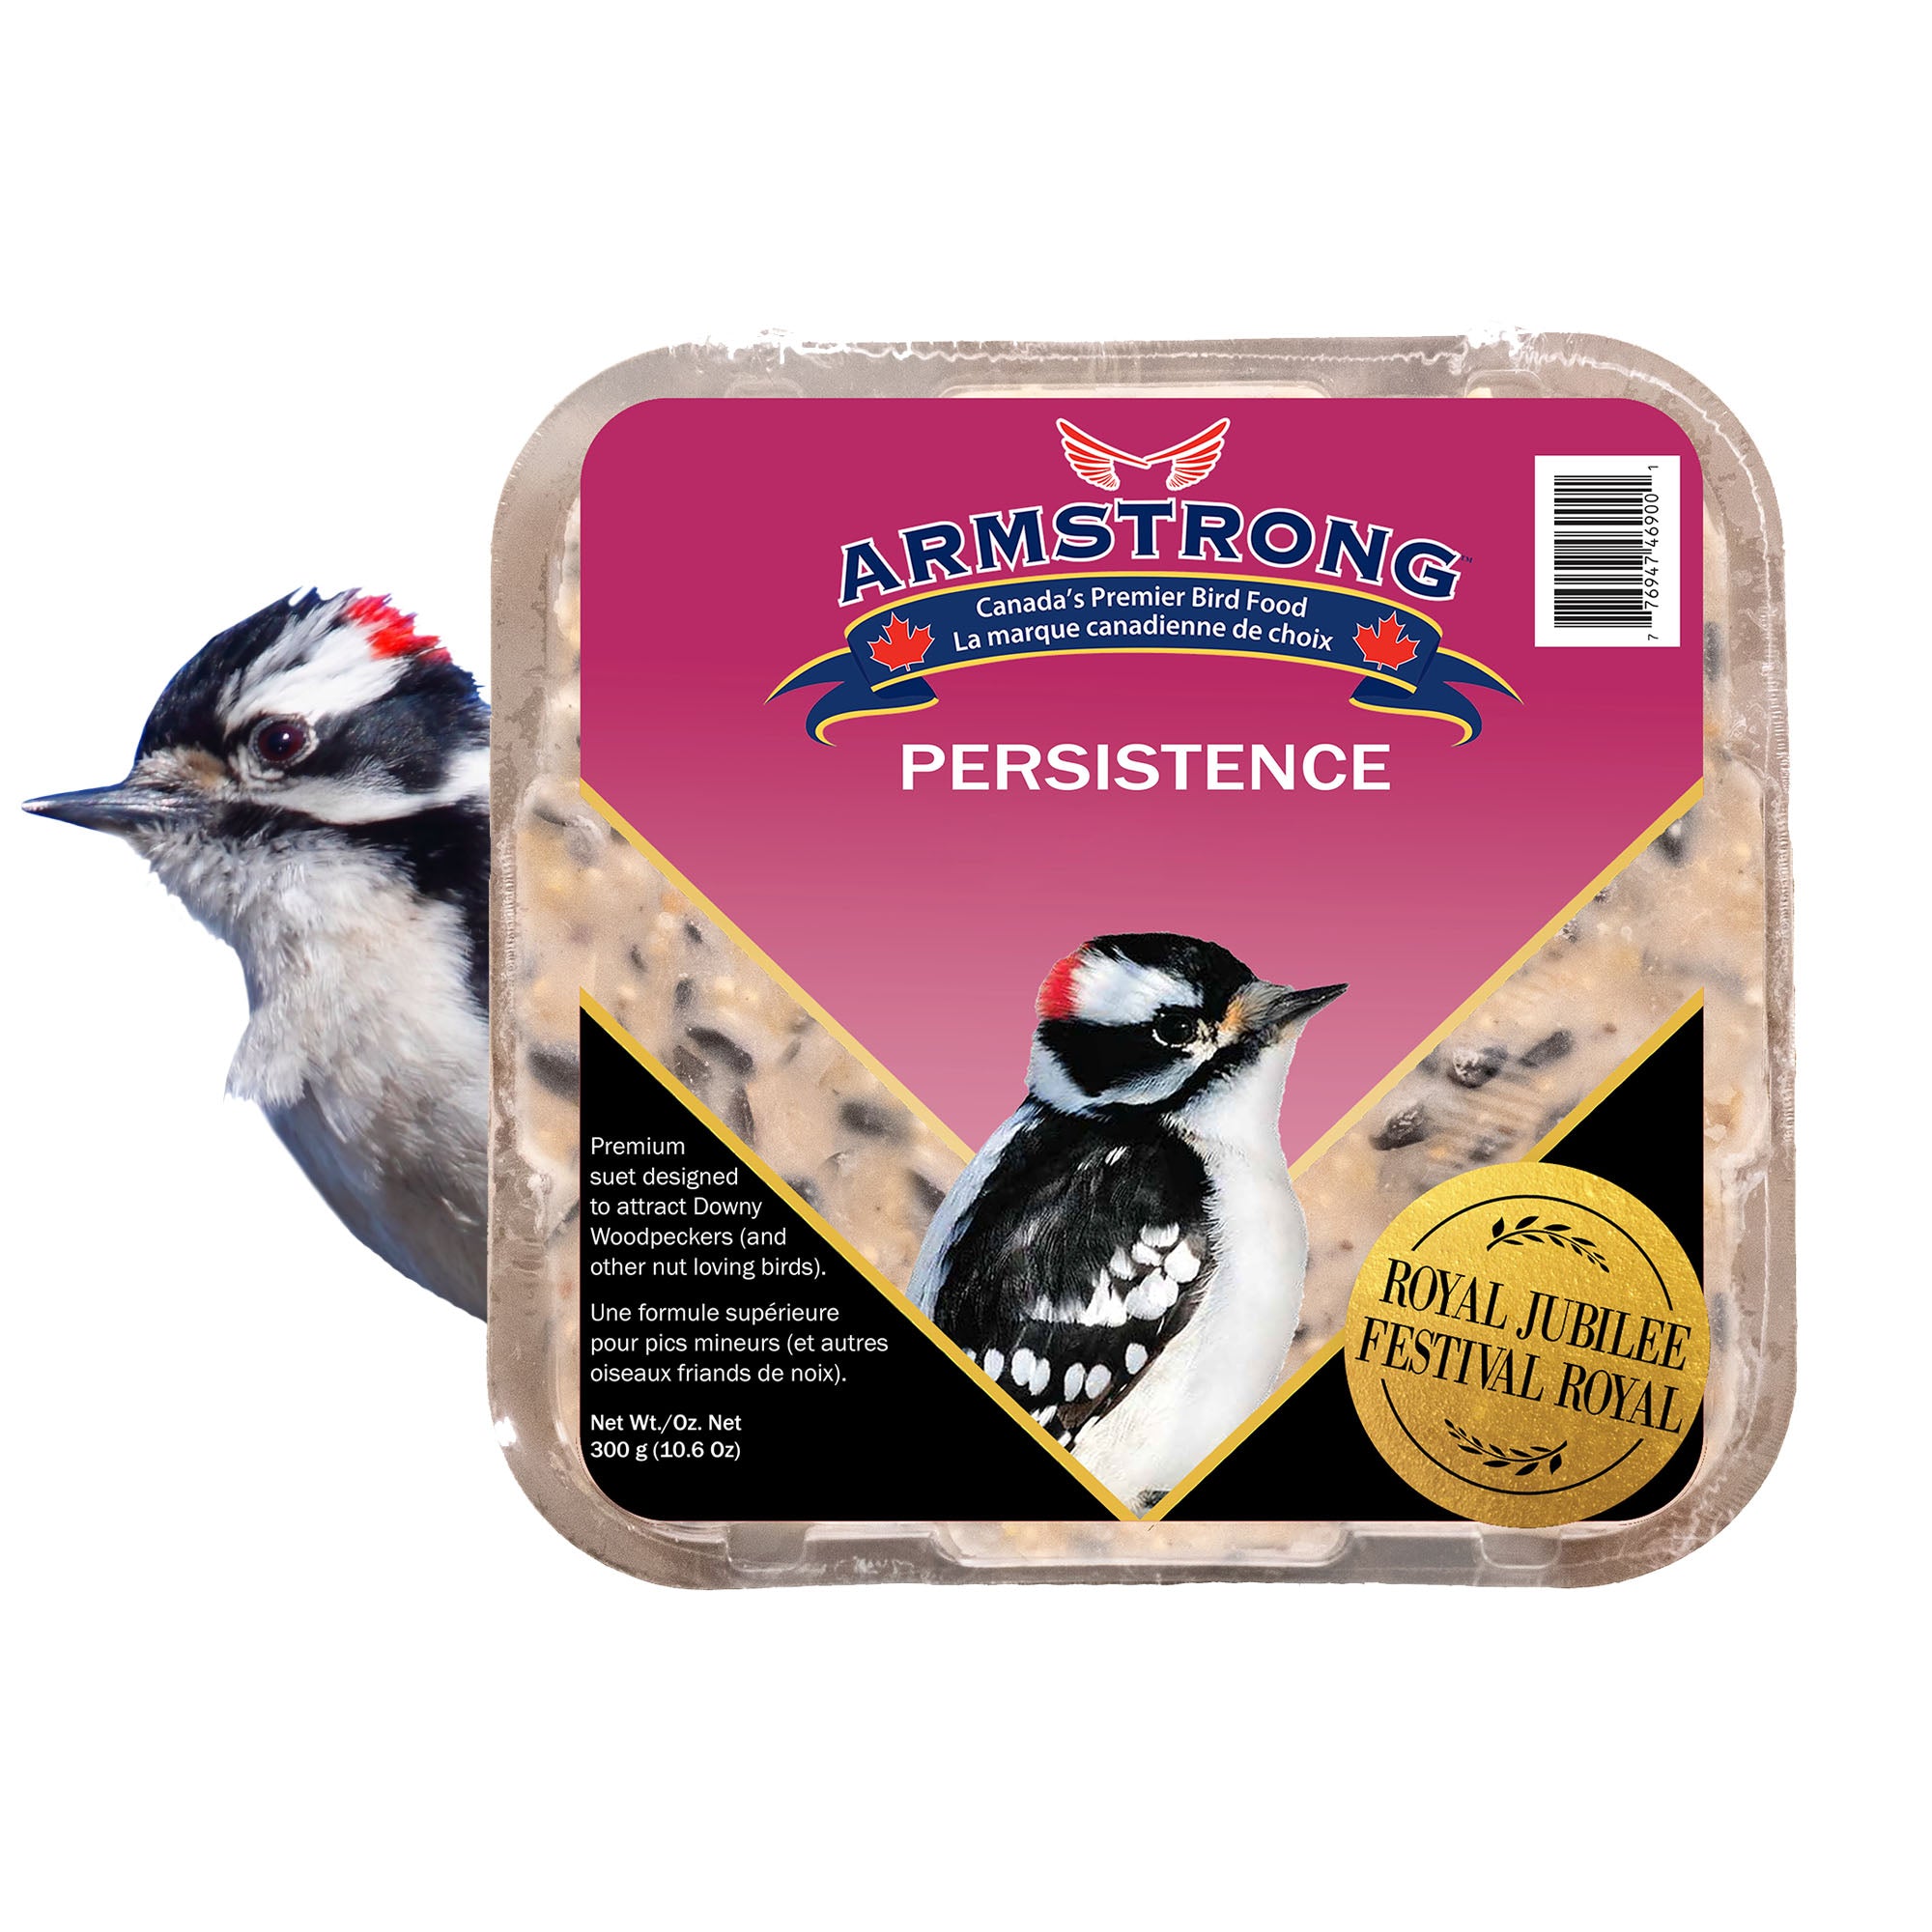 Armstrong Wild Bird Food Royal Jubilee Persistence Suet Blend for Woodpeckers, 10.6oz (Pack of 3)